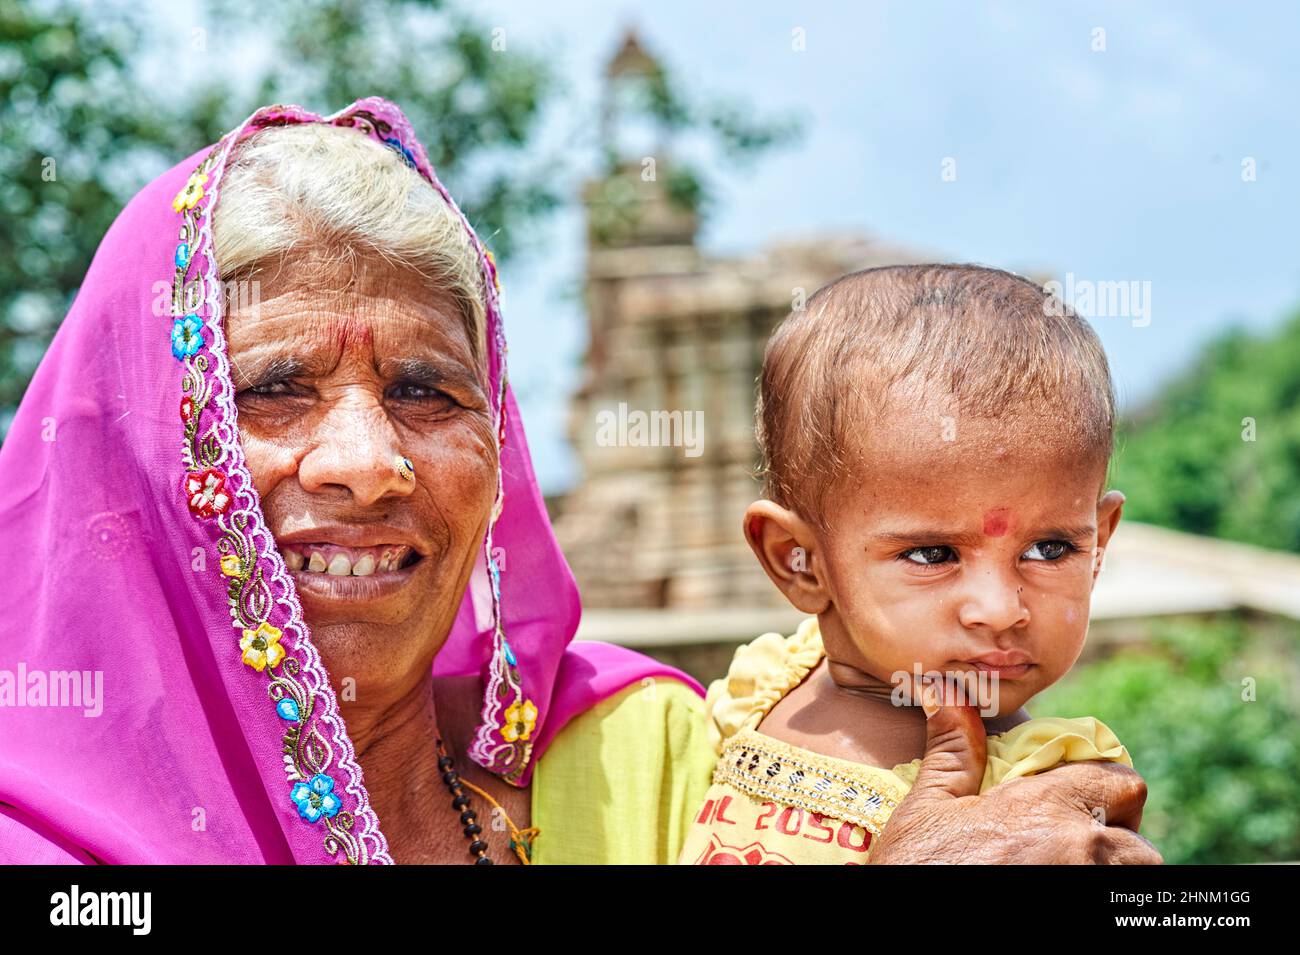 India Rajasthan. Portrait of an old woman and child at Chittorgarh Stock Photo